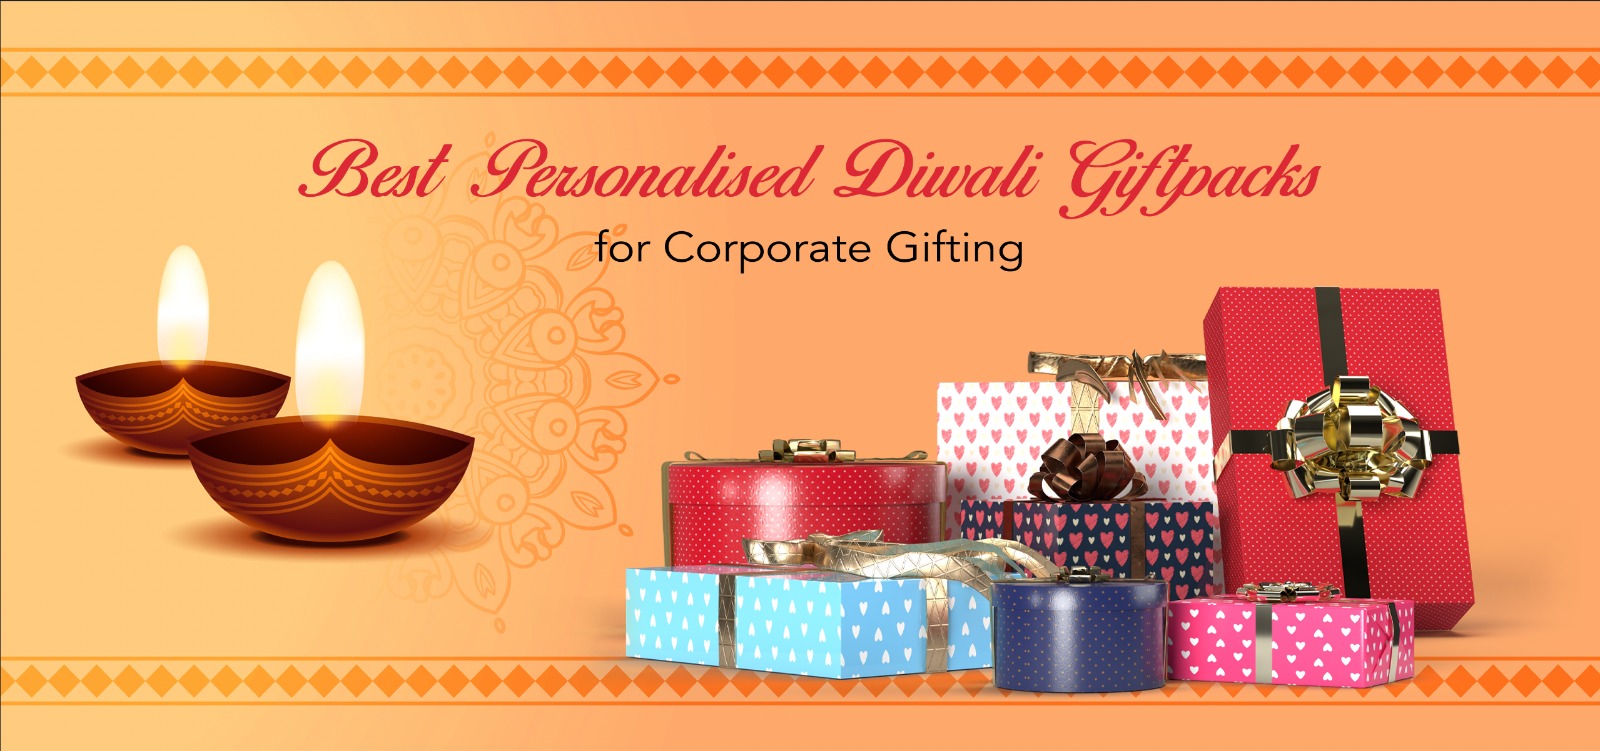 Best personalised Diwali giftpacks for the corporate gifting